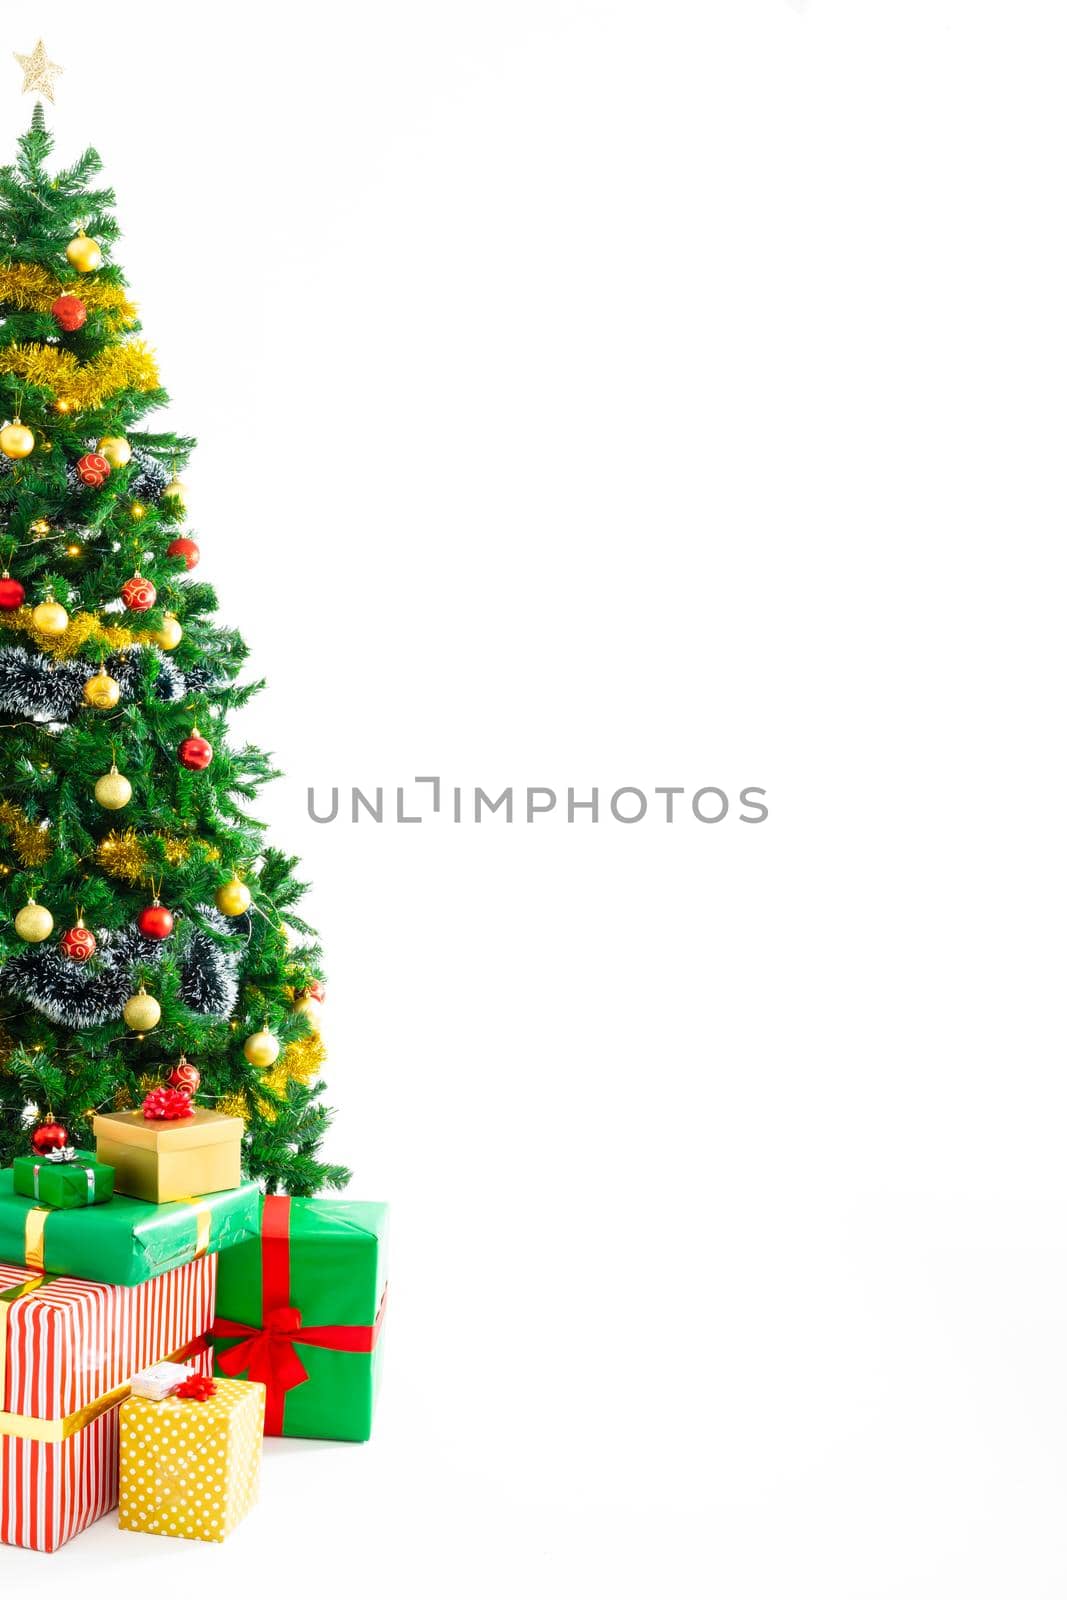 Composition of christmas tree with decorations, presents and copy space on white background by Wavebreakmedia